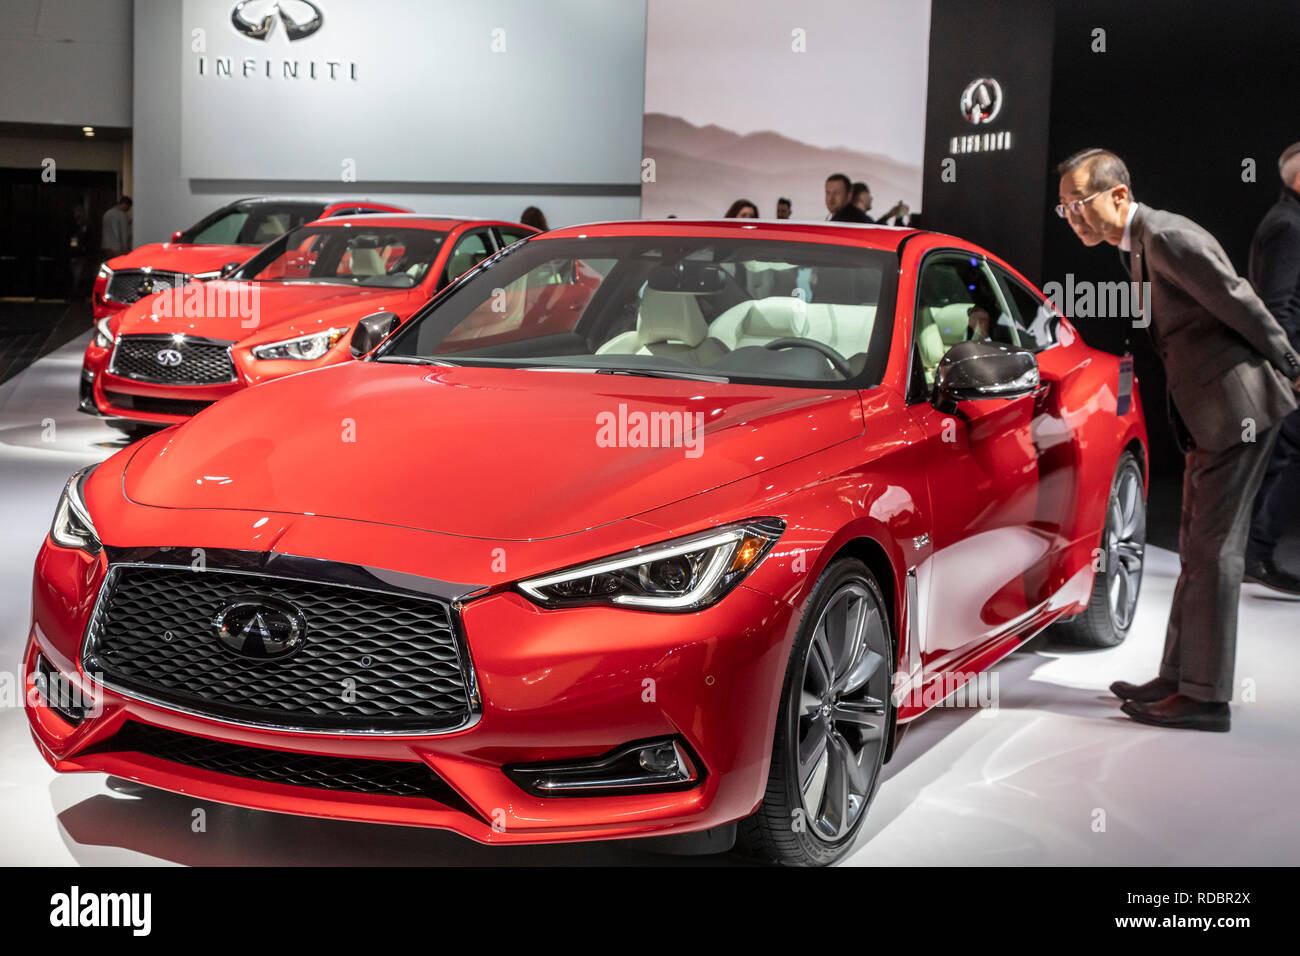 Detroit, Michigan - Three red Infiniti vehicles on display at the North American International Auto Show. From front: Q60S, Q50S, QX50. Stock Photo